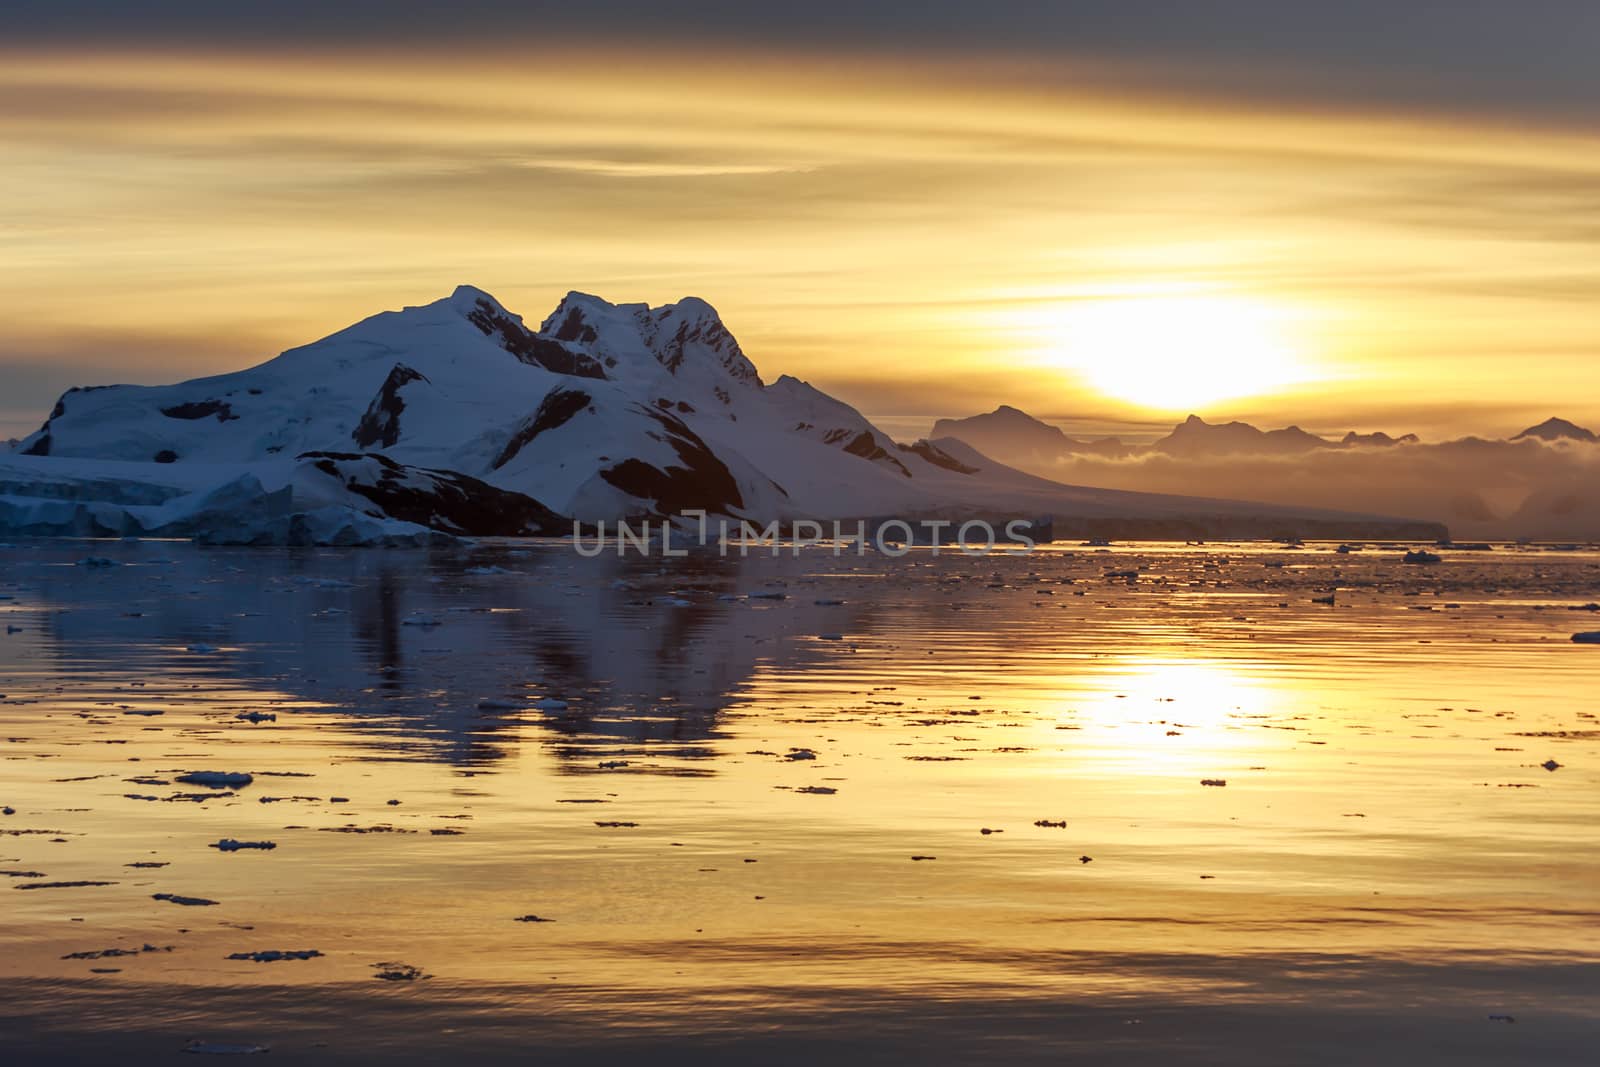 Sunset over the mountains and drifting icebergs at Lemaire Strait, Antarctica